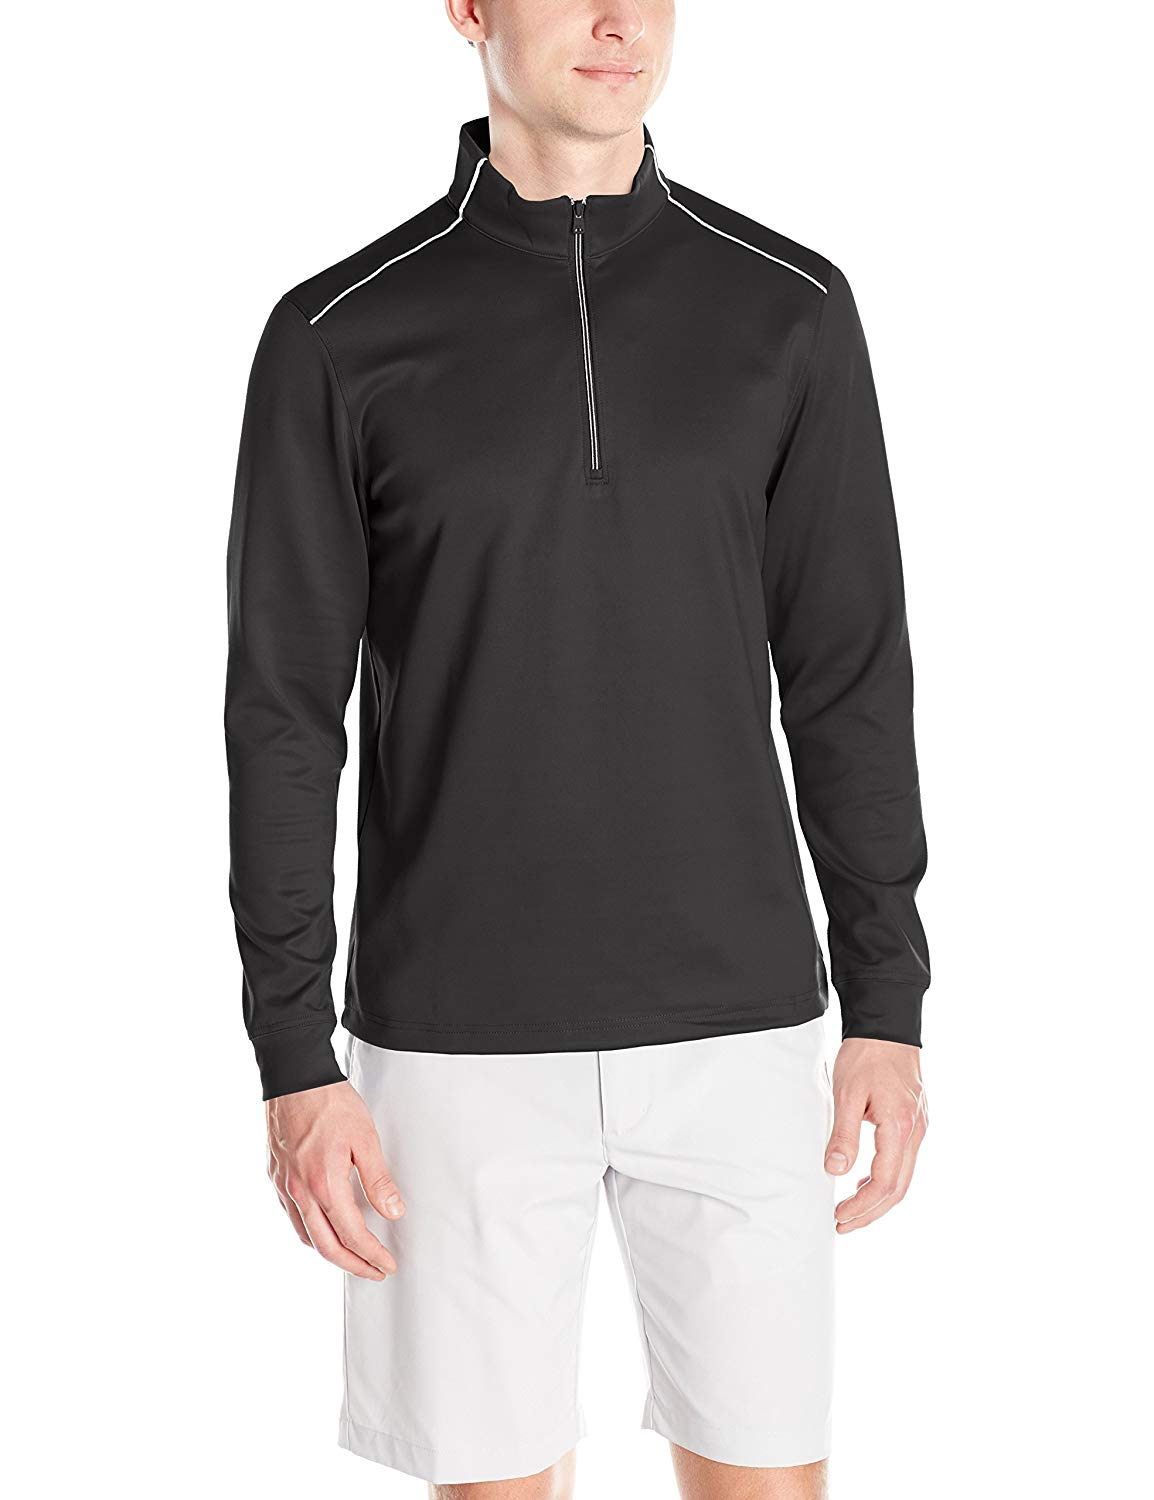 Buy Greg Norman Mens Golf Pullovers for Best Prices Online!